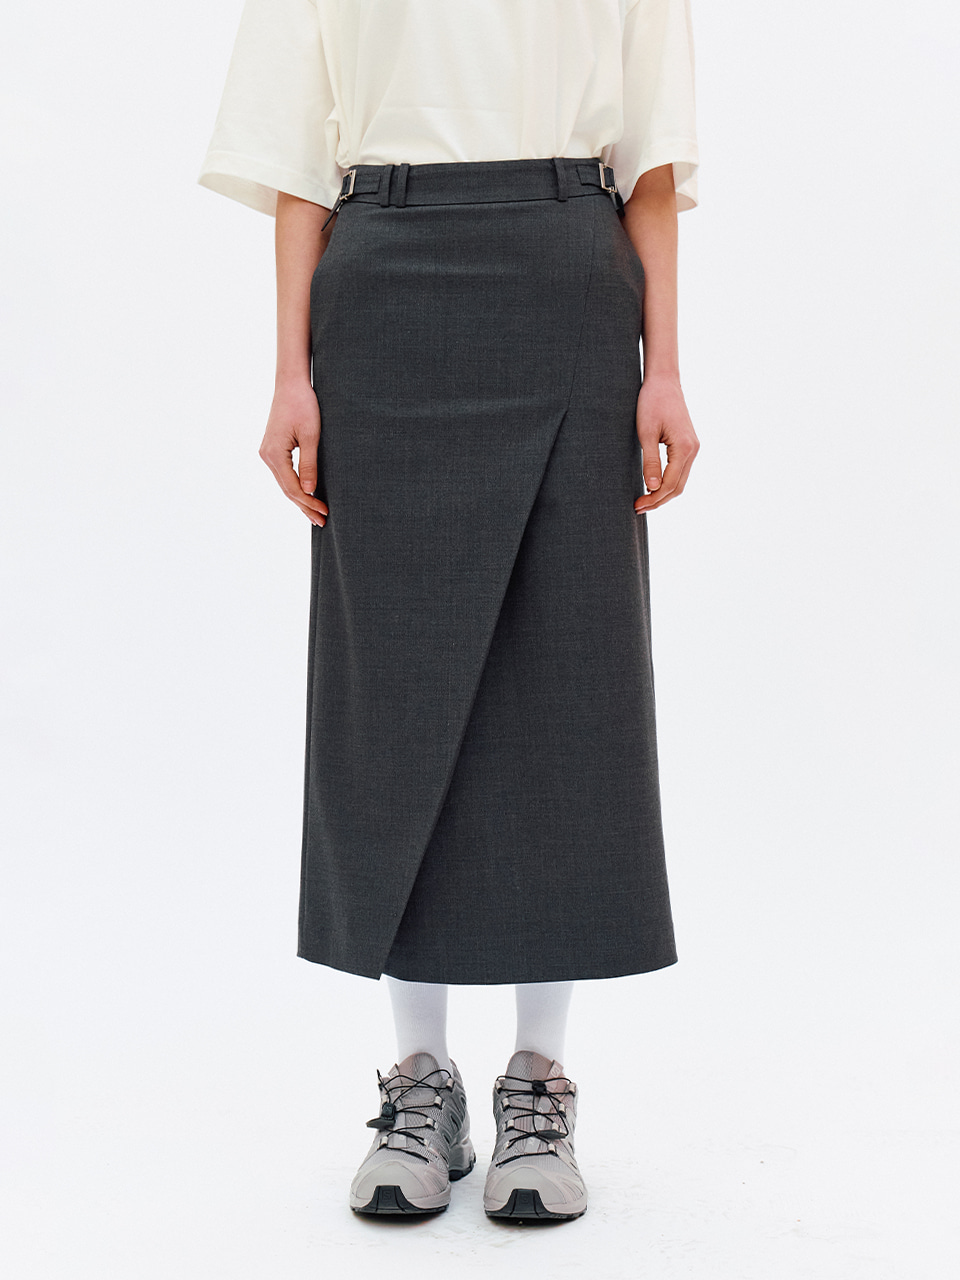 IEY - SLIT COVER SKIRT Charcoal